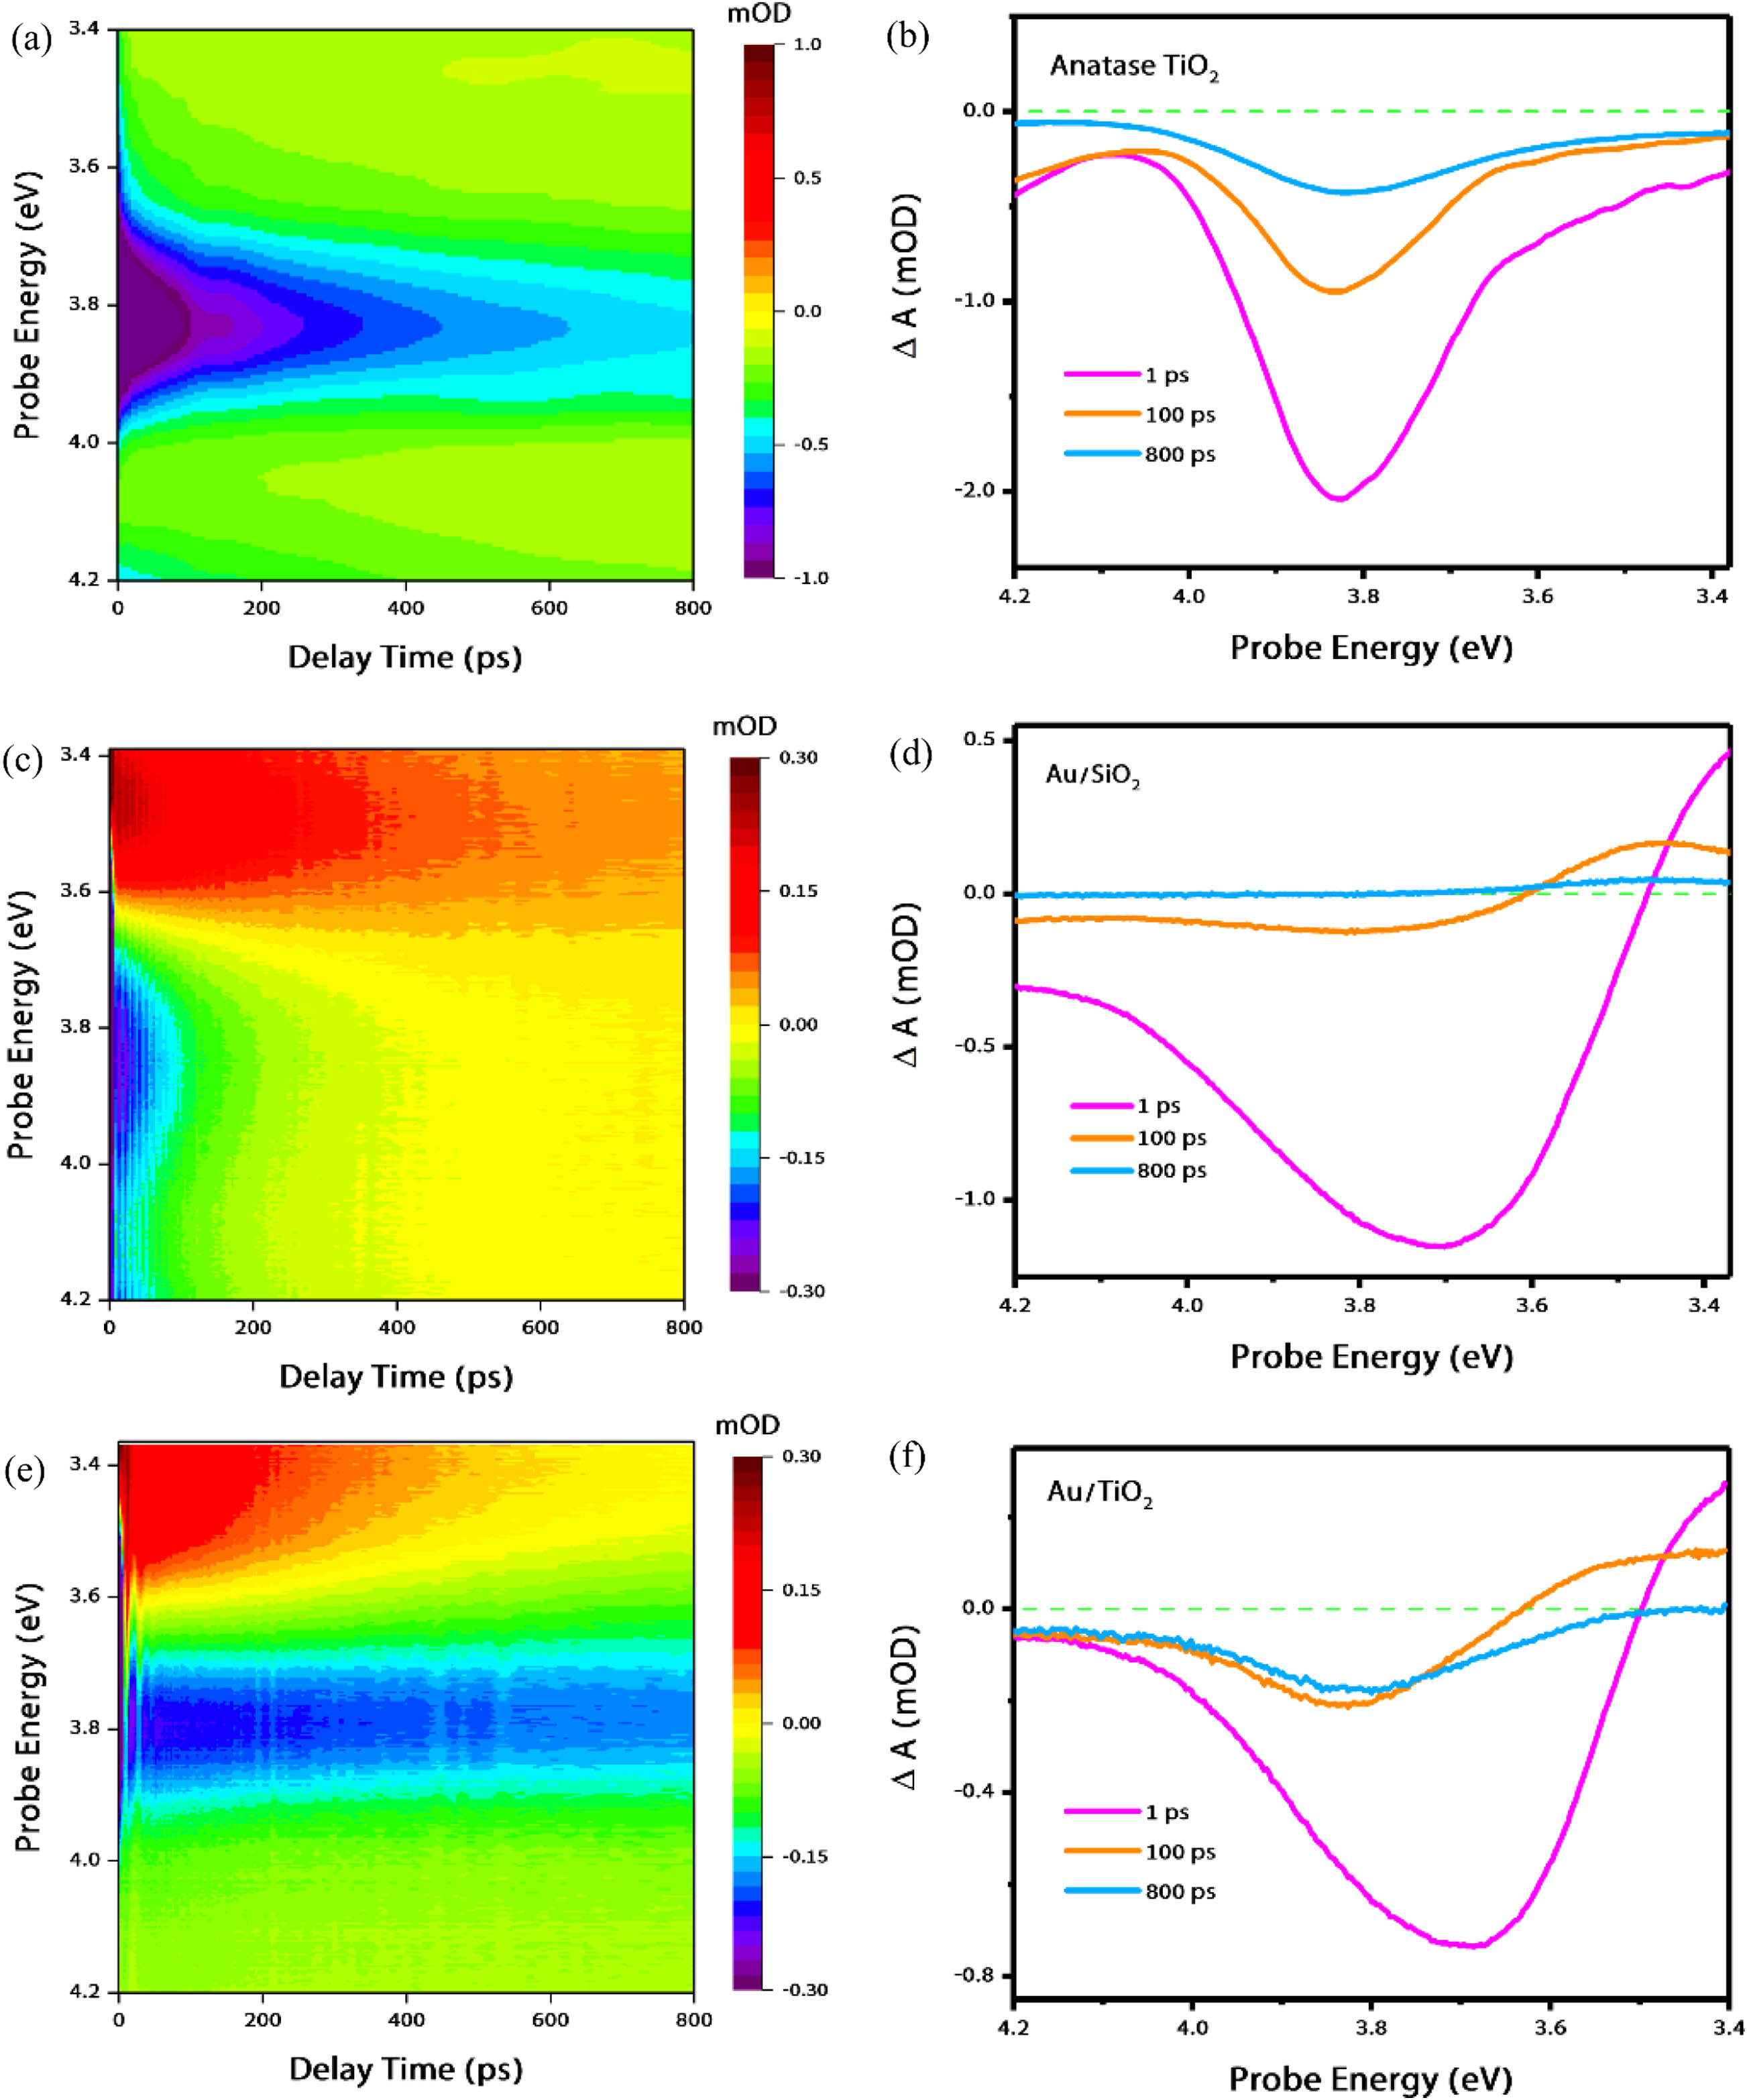 Time-energy TA maps and the corresponding spectral traces at 1, 100, and 800 ps. (a), (b) Bare anatase TiO2 NPs upon above-BG excitation (4.0 eV); (c), (d) Au/SiO2 NPs upon plasmon excitation (2.0–2.4 eV); (e), (f) Au/TiO2 NPs upon plasmon excitation (2.0–2.4 eV) with a fluence of ∼330 μJ/cm2; all NPs are dispersed in aqueous solution.